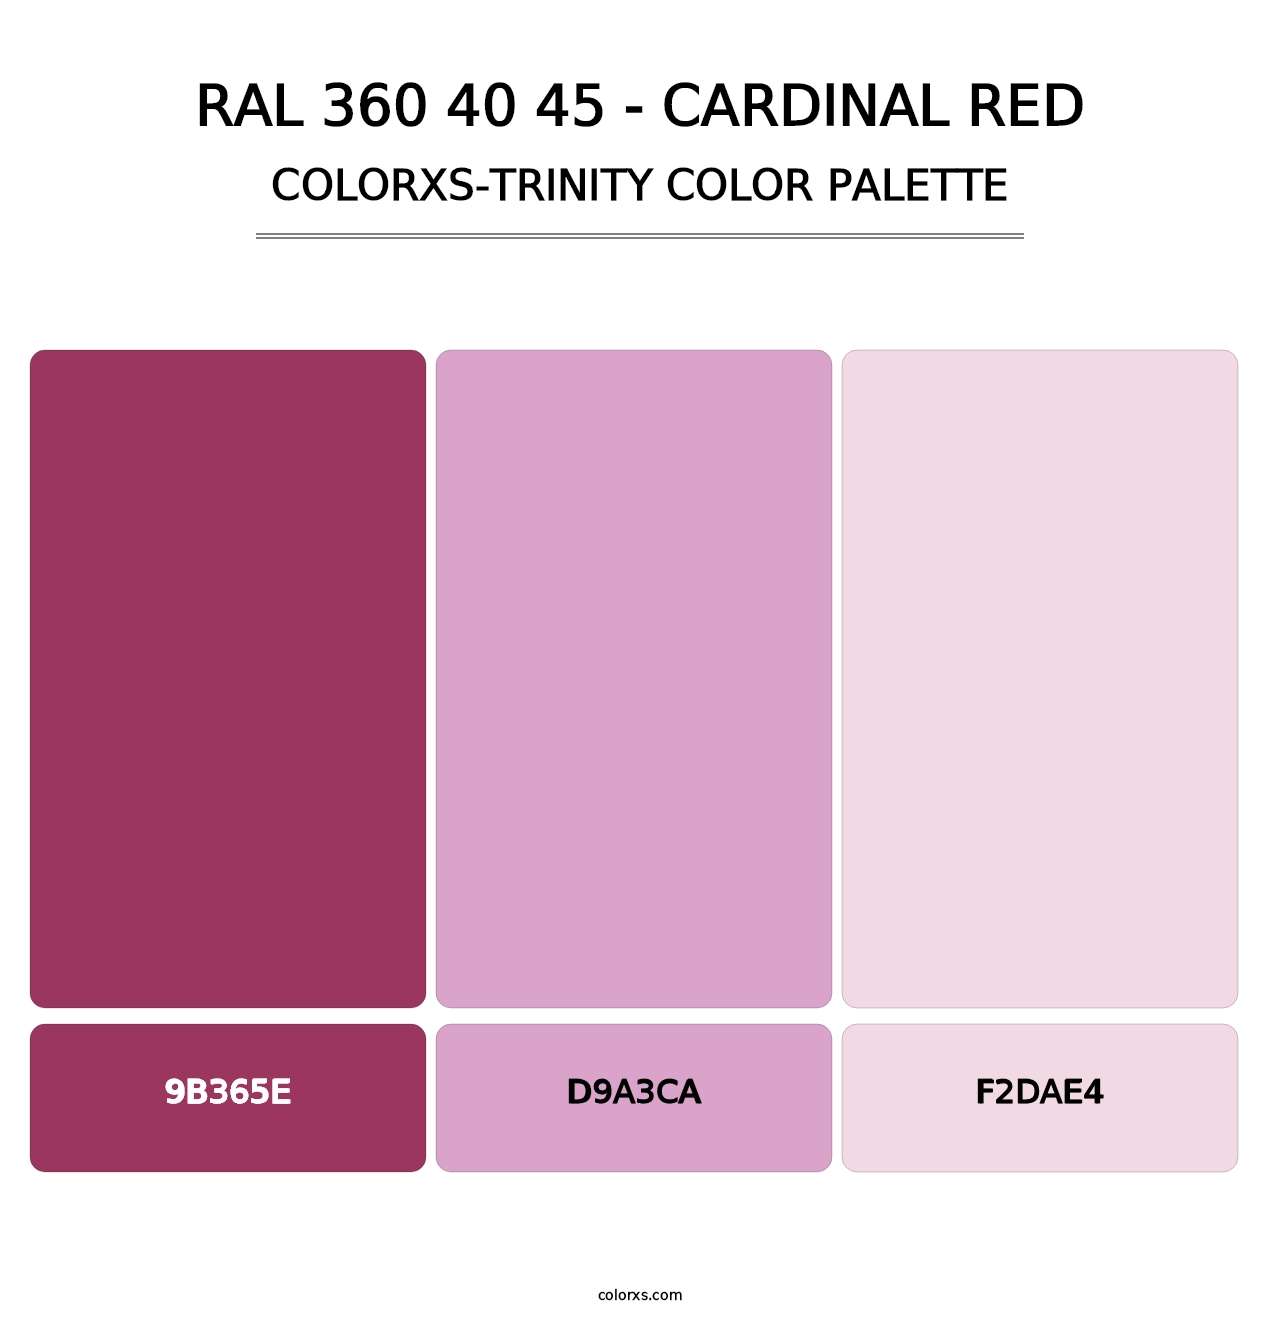 RAL 360 40 45 - Cardinal Red - Colorxs Trinity Palette